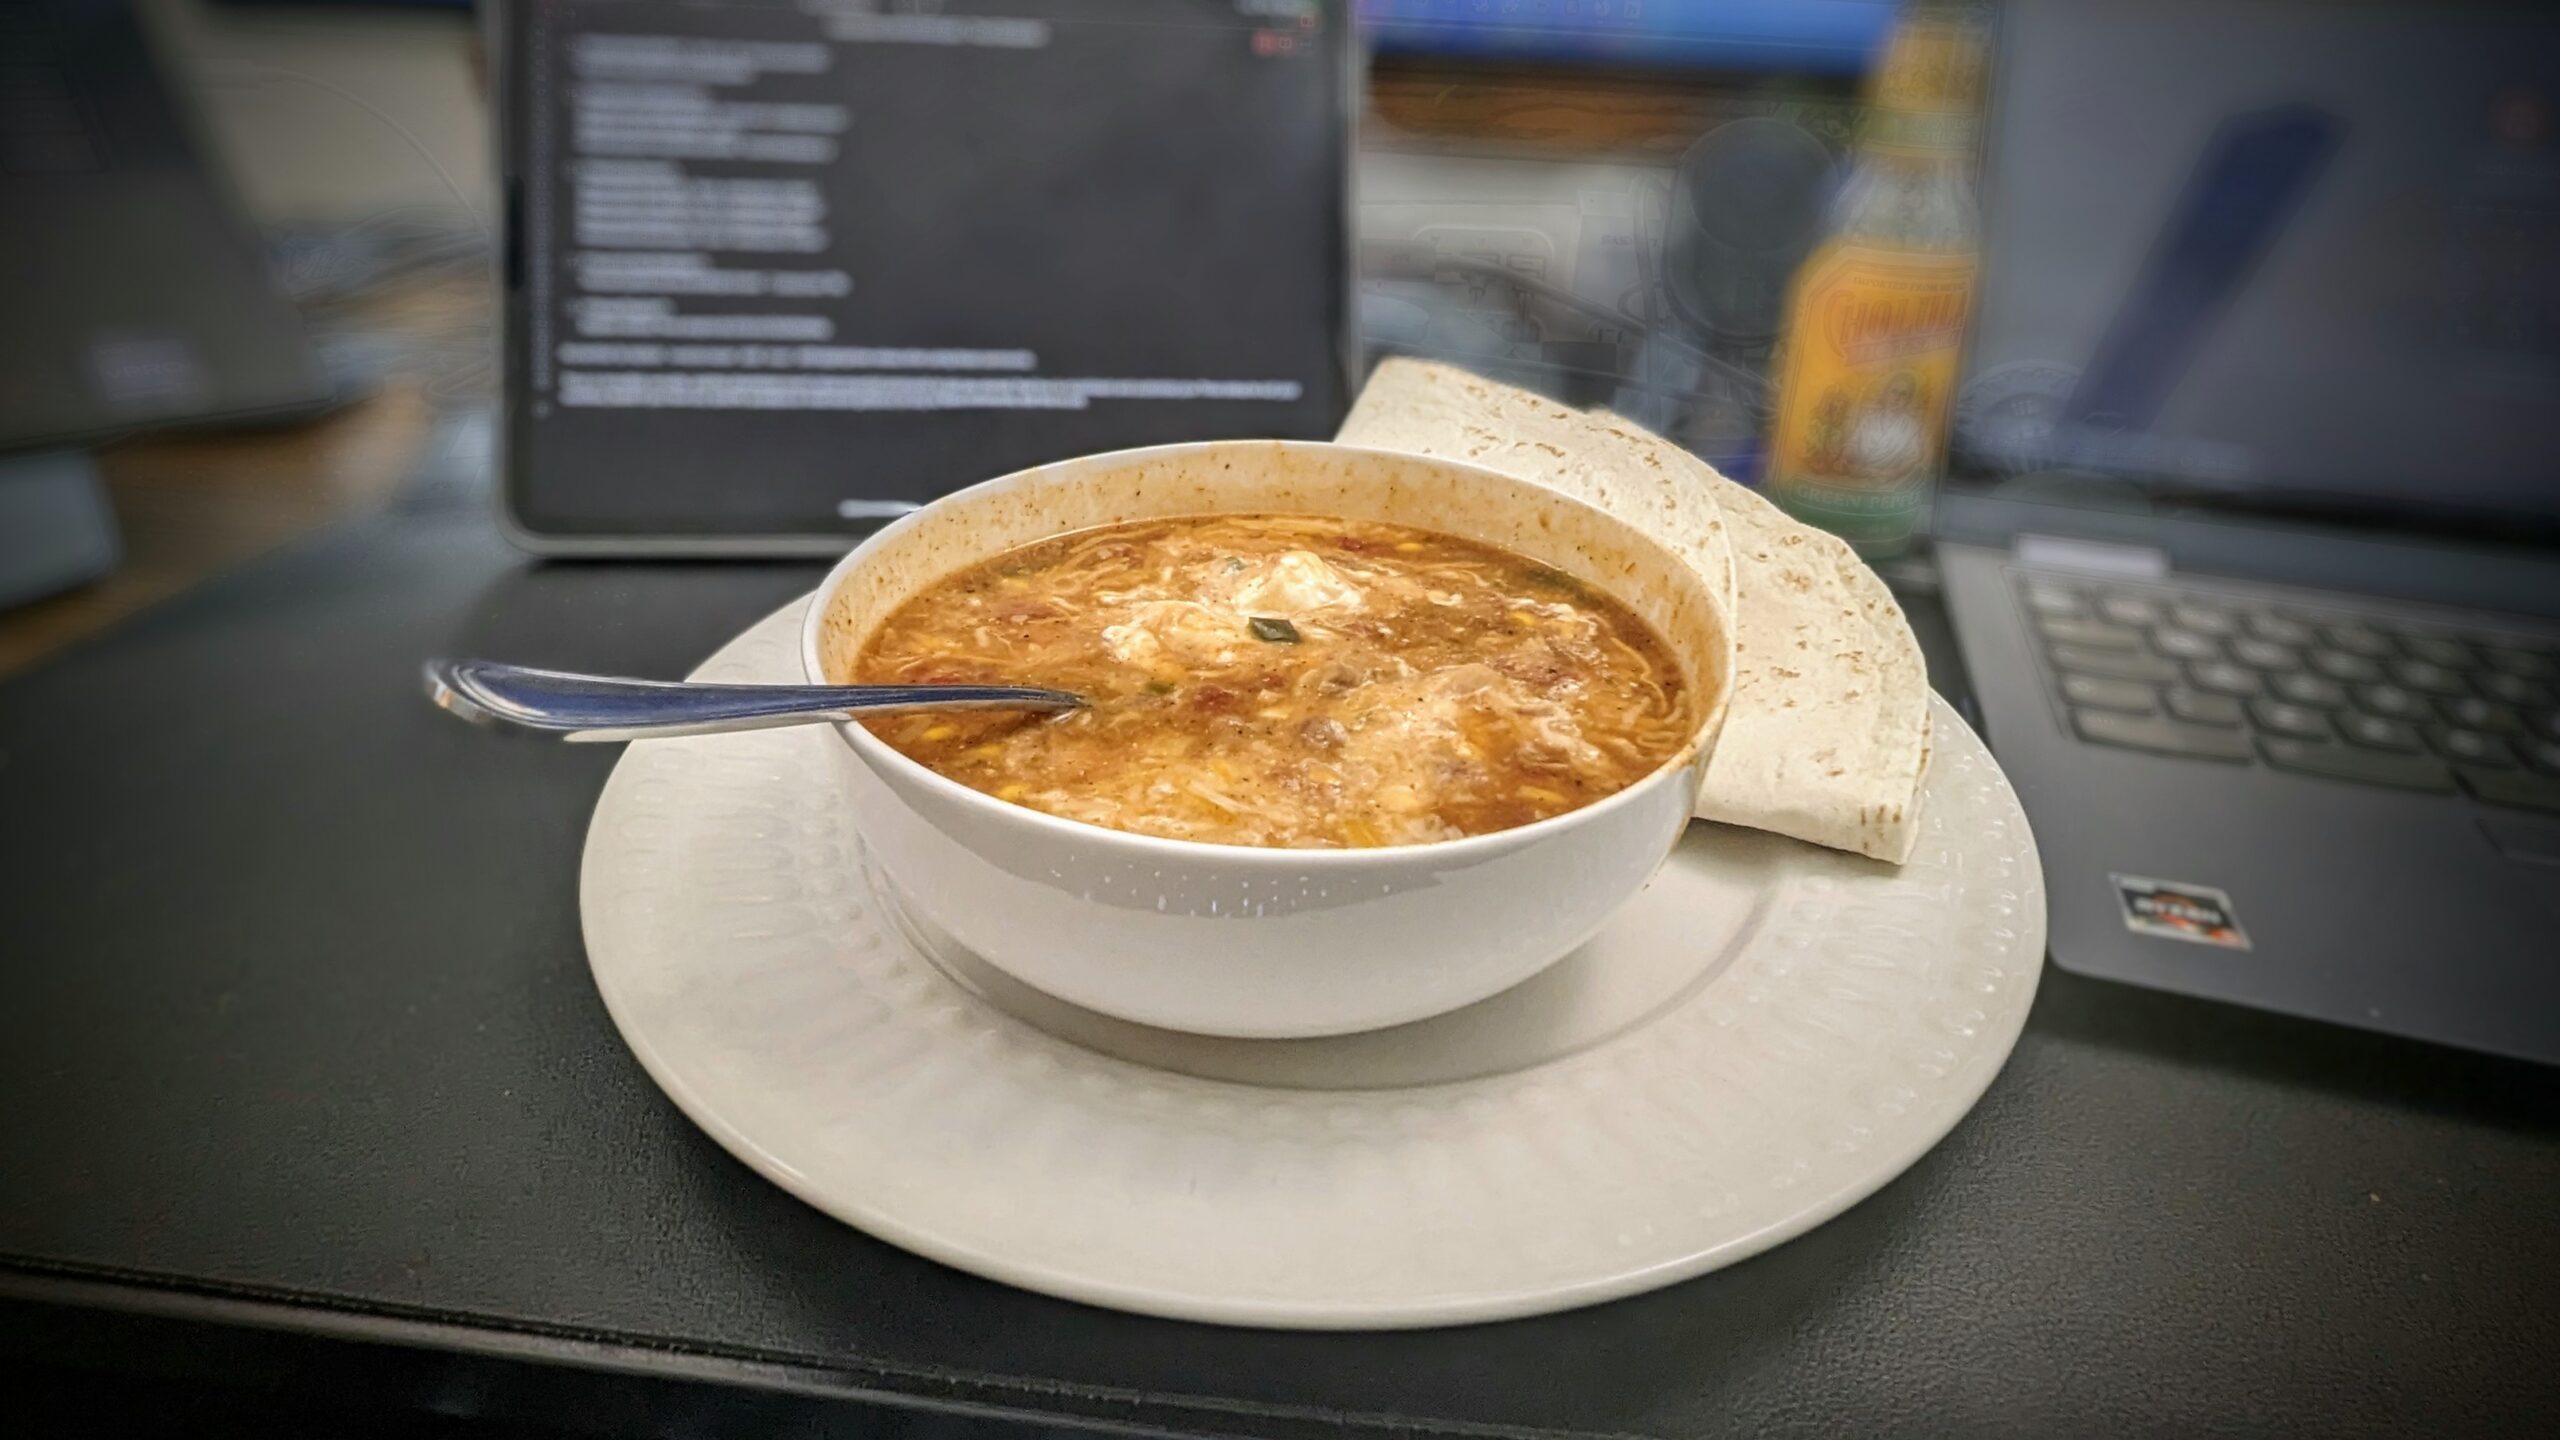 Chicken Enchilada Stew, topped with shredded Wisconsin sharp cheddar cheese and sour cream, with buttered flour tortillas on the side.